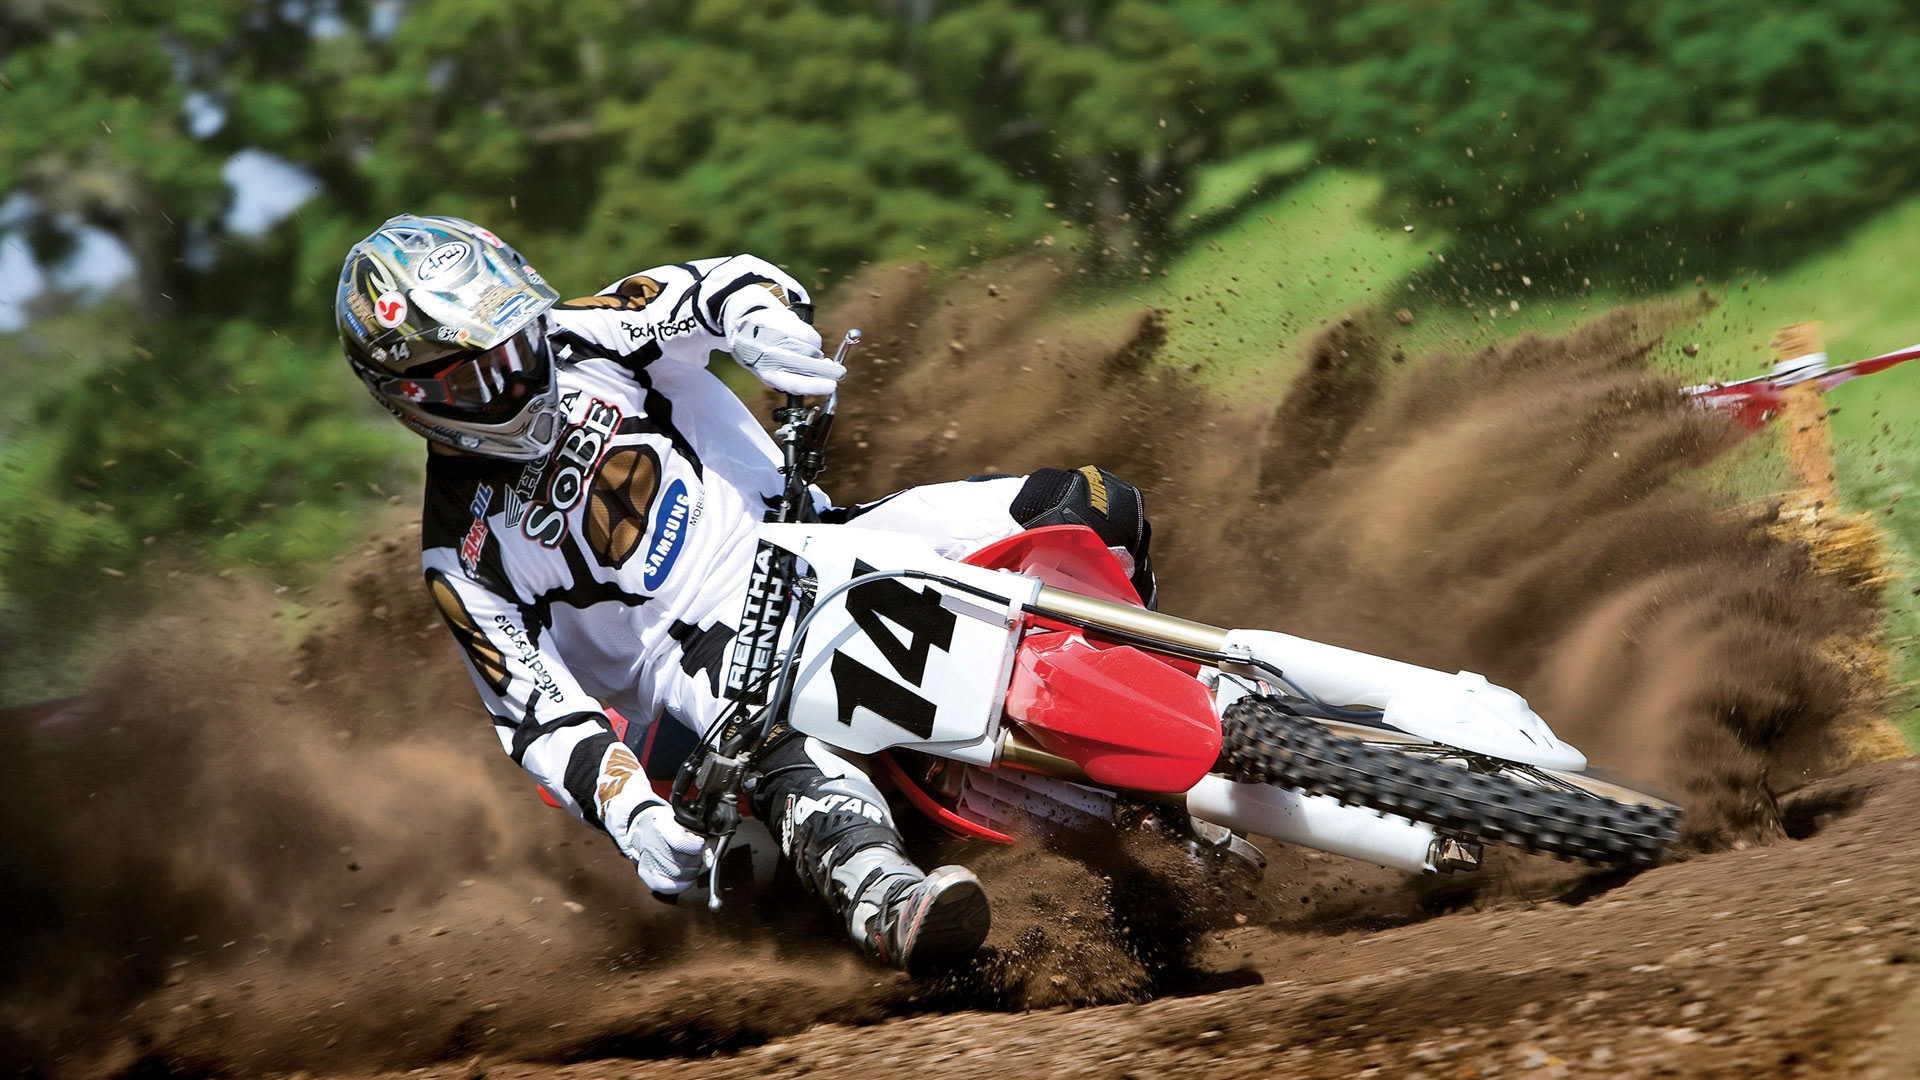 Man Riding Red and White Motocross Dirt Bike. Wallpaper in 1920x1080 Resolution